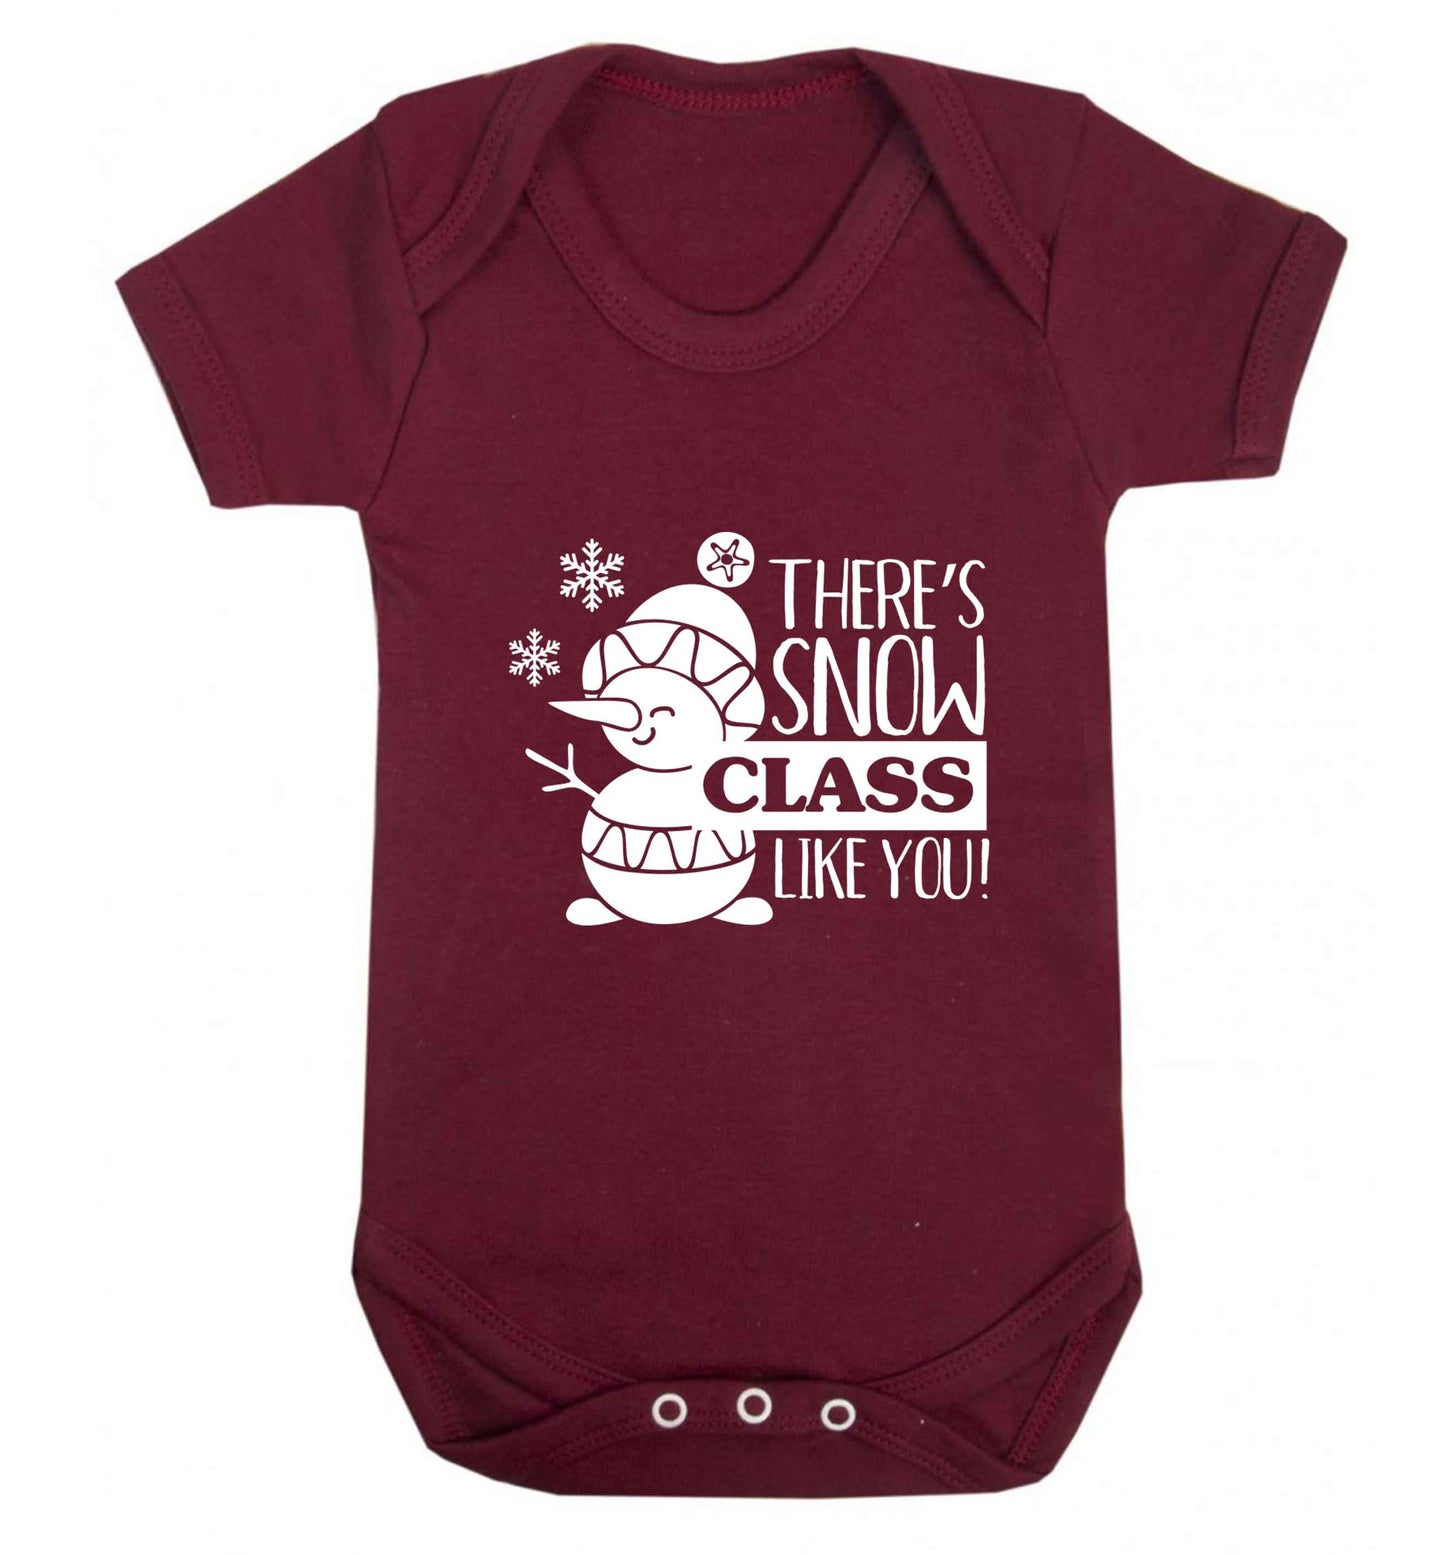 There's snow class like you baby vest maroon 18-24 months